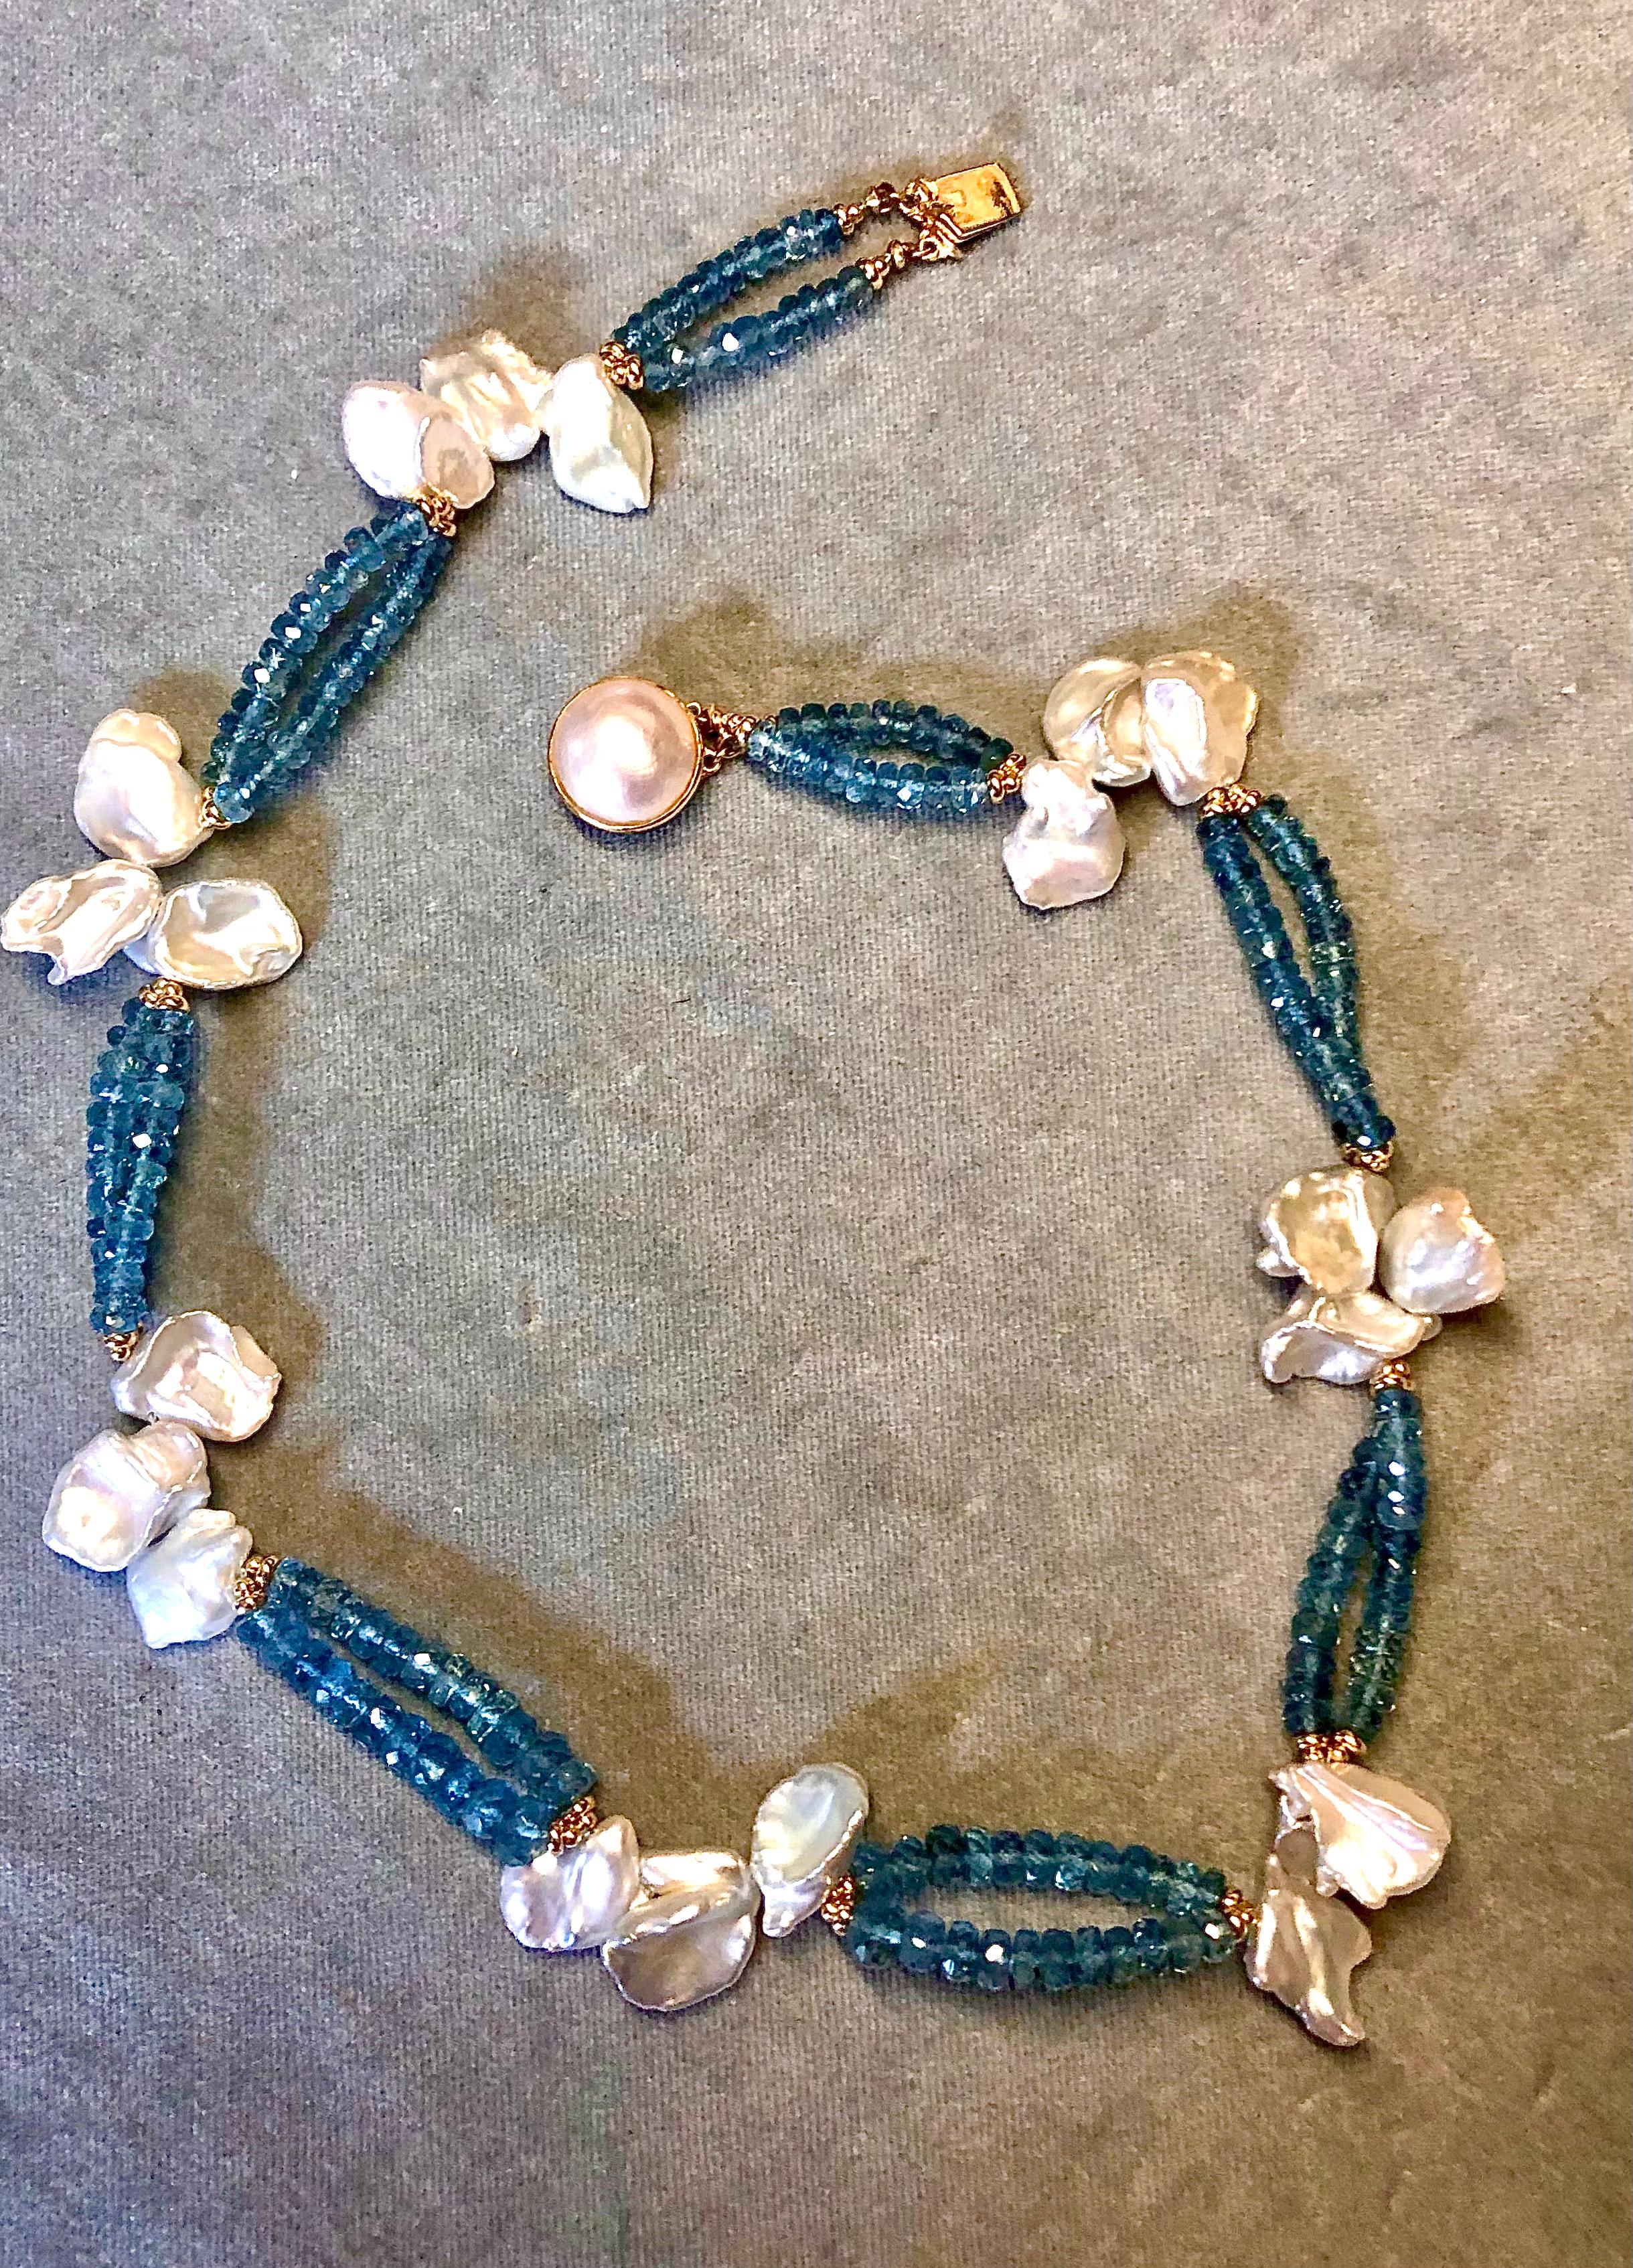 Double strand necklace of Santa Maria deep blue  aquamarine rondelles with very lustrous large white baroque Keishi pearls flanked with 14kt yellow gold smooth rondelles . Finished with fine Mabe pearl and 14kt yellow gold clasp. 16” in length.